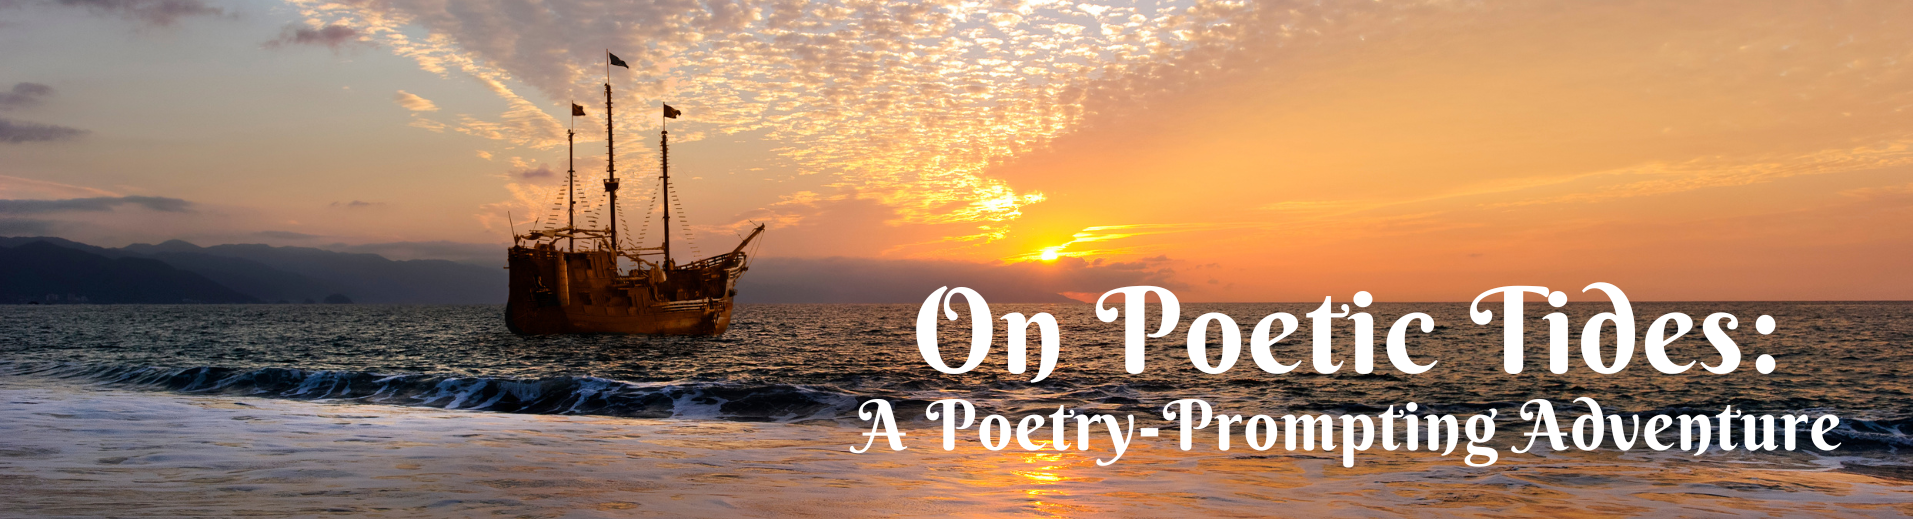 On Poetic Tides: A Poetry-Prompting Adventure